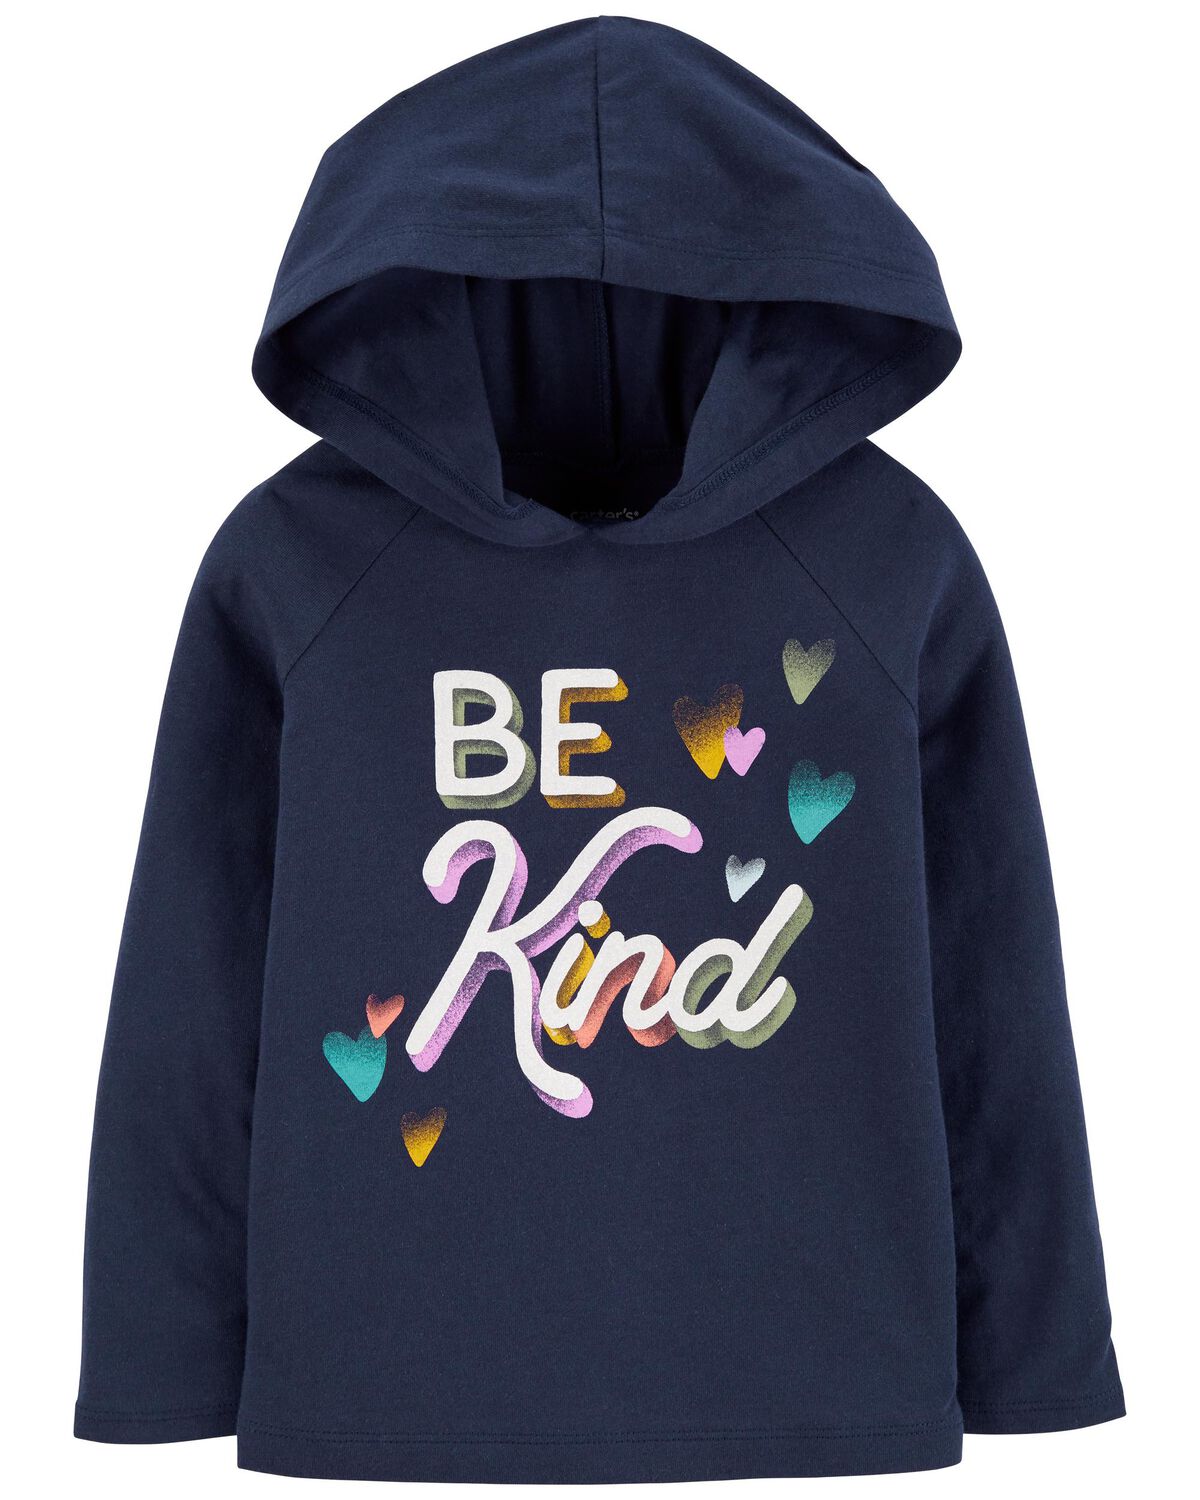 Be Kind Hooded Tee 2T-Carters Brand